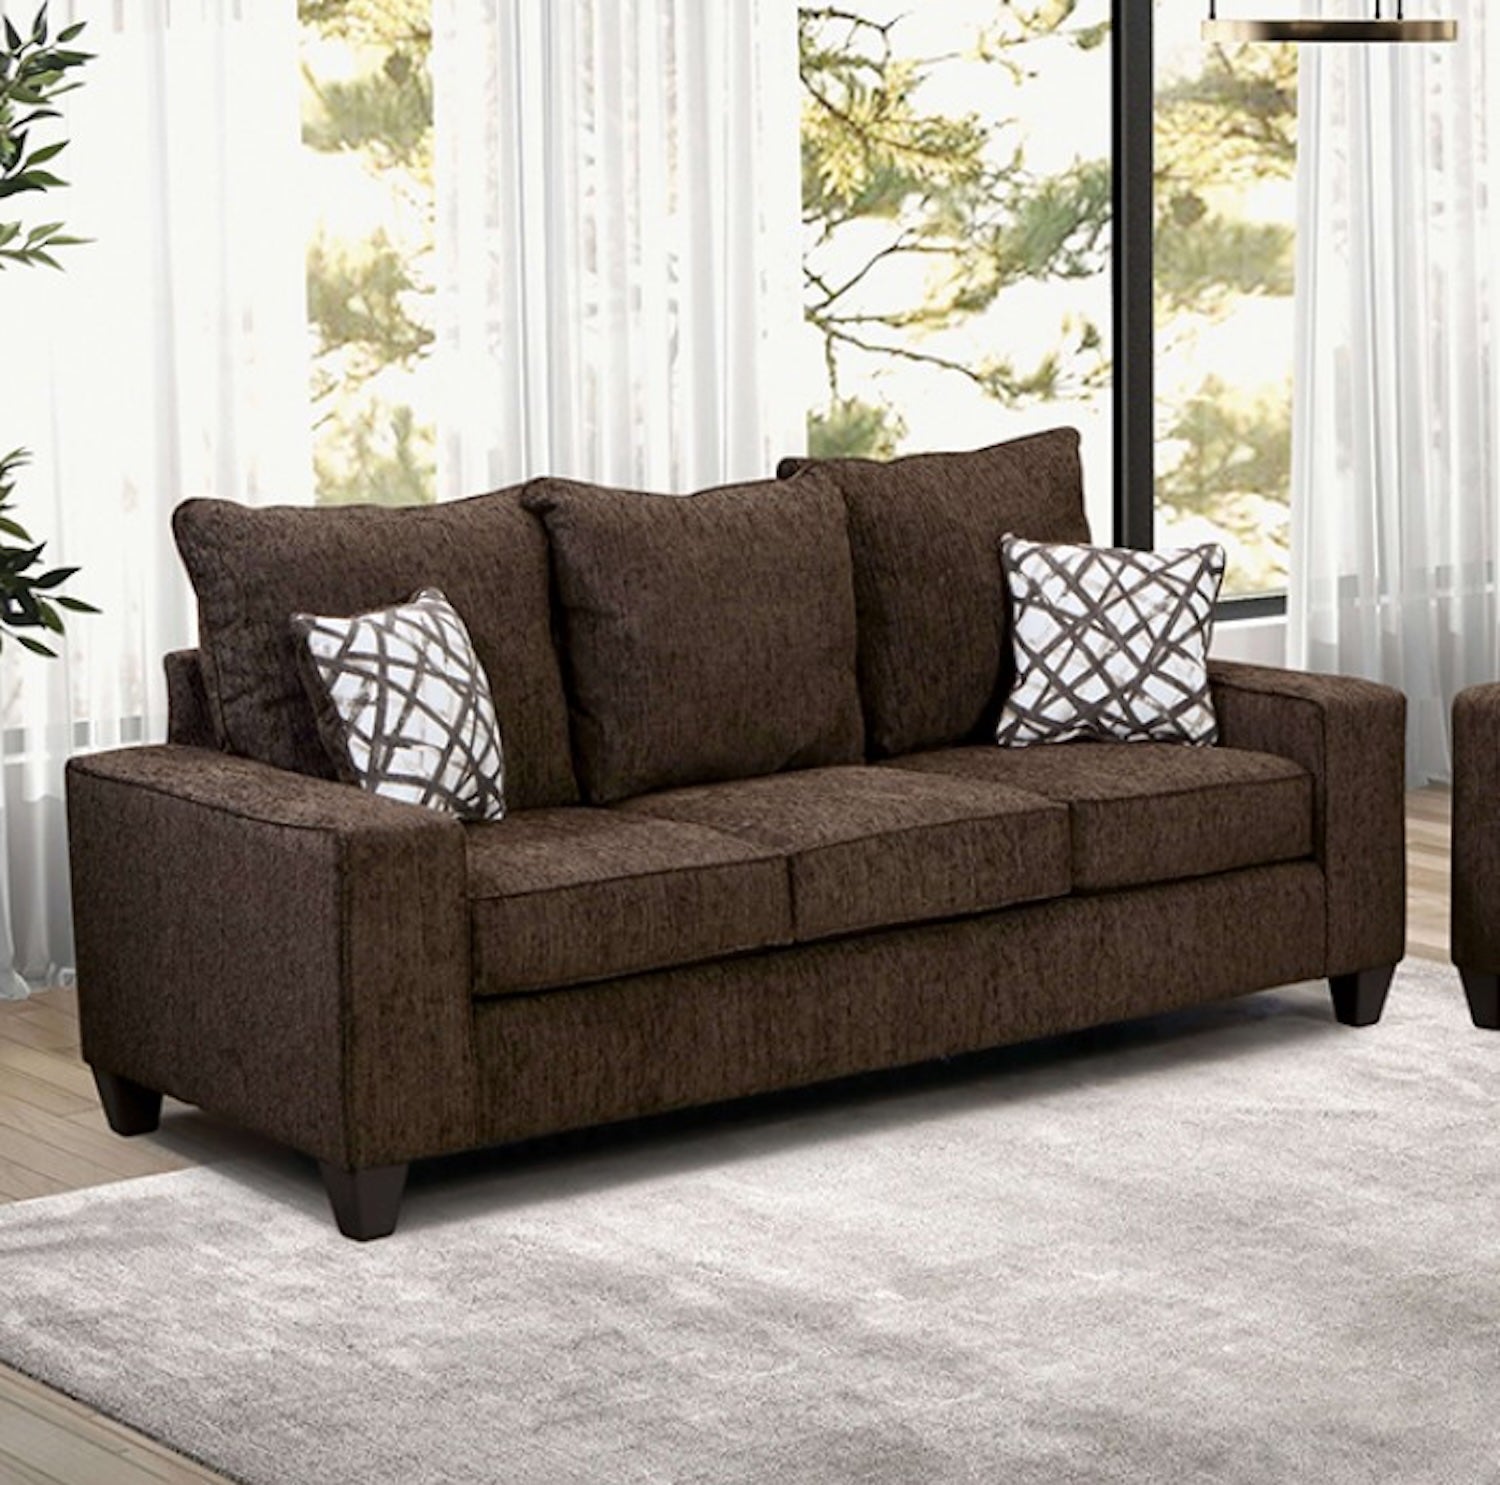 West Acton Contemporary Chenille Sofa & Loveseat Set - Brown